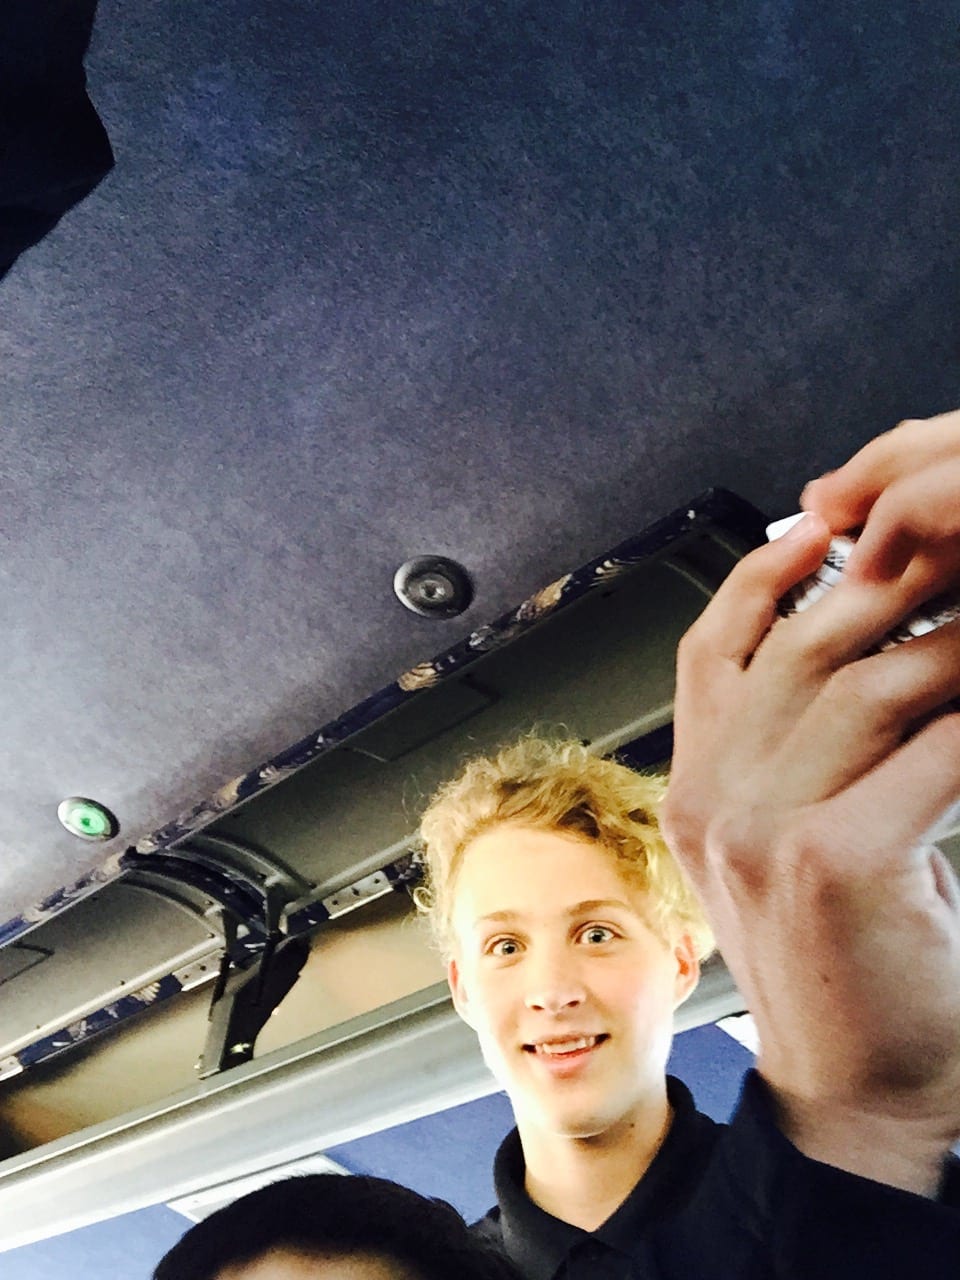 Sean watching his friends play cards on the team bus.